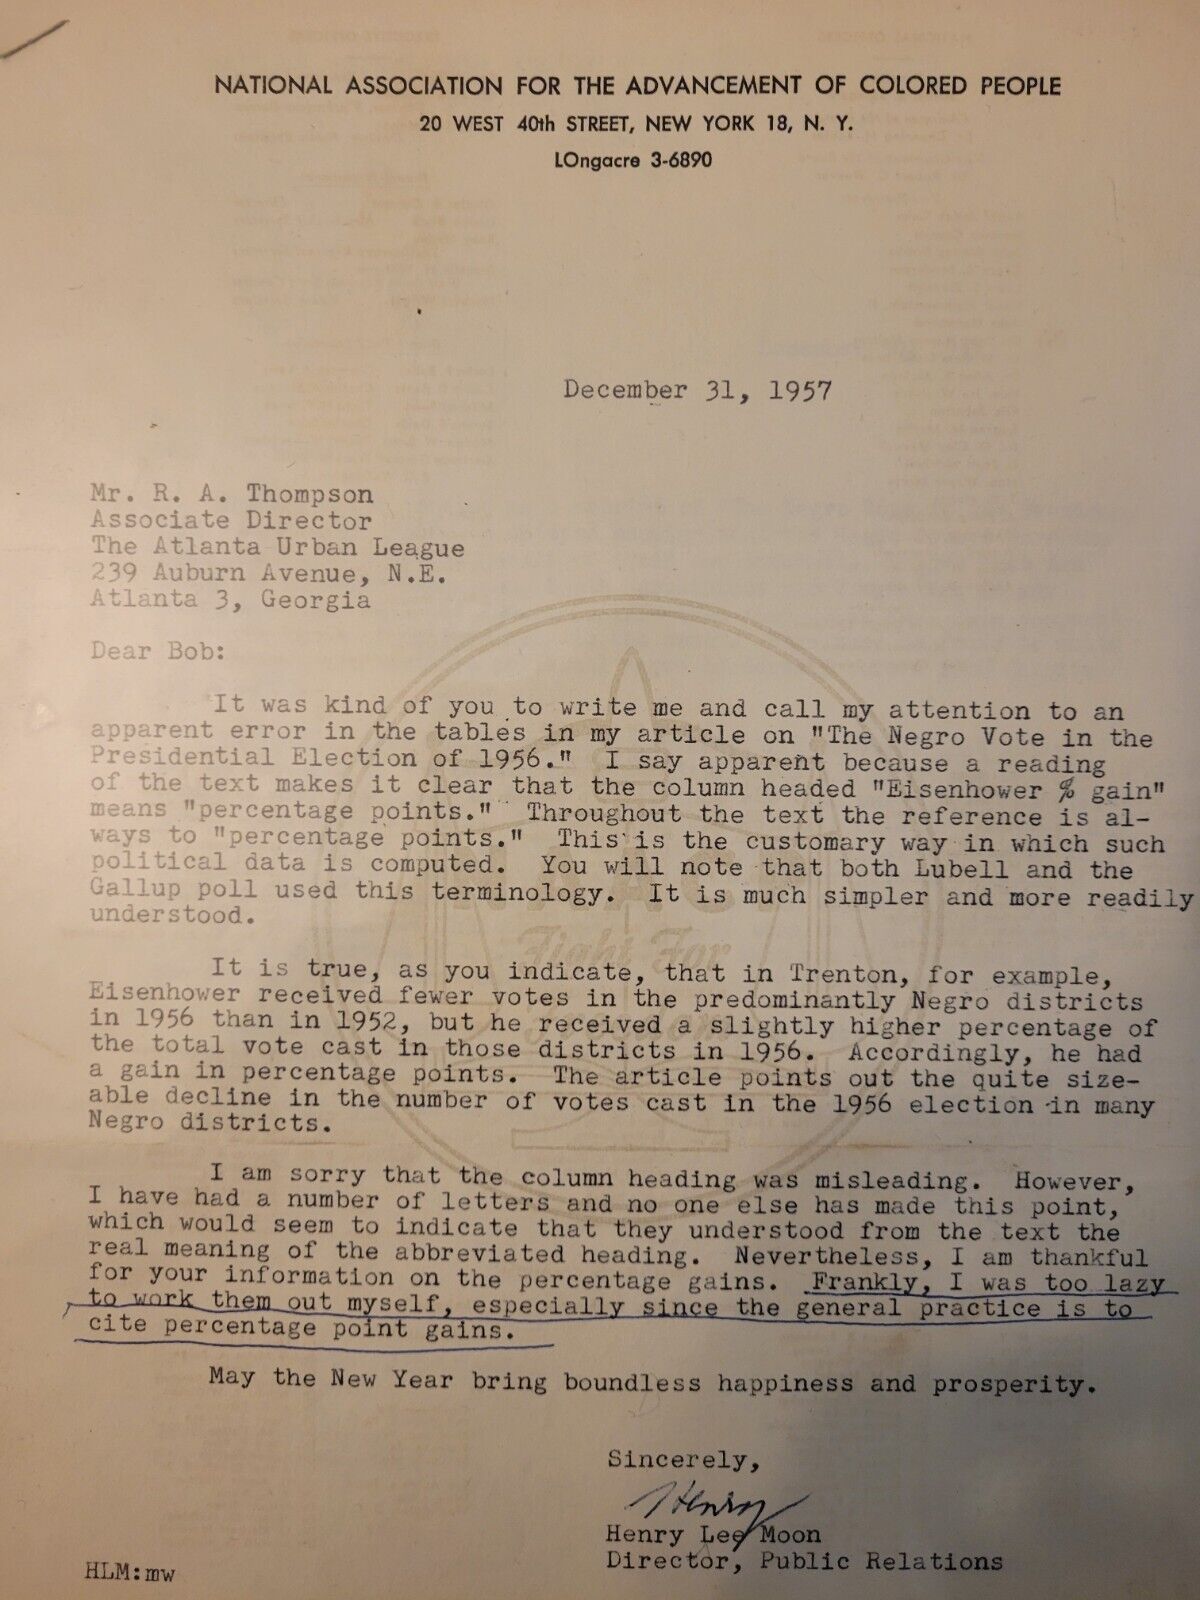 Super RARE 1957 Signed Letter From Civil Rights Leader Henry Lee Moon. NAACP 